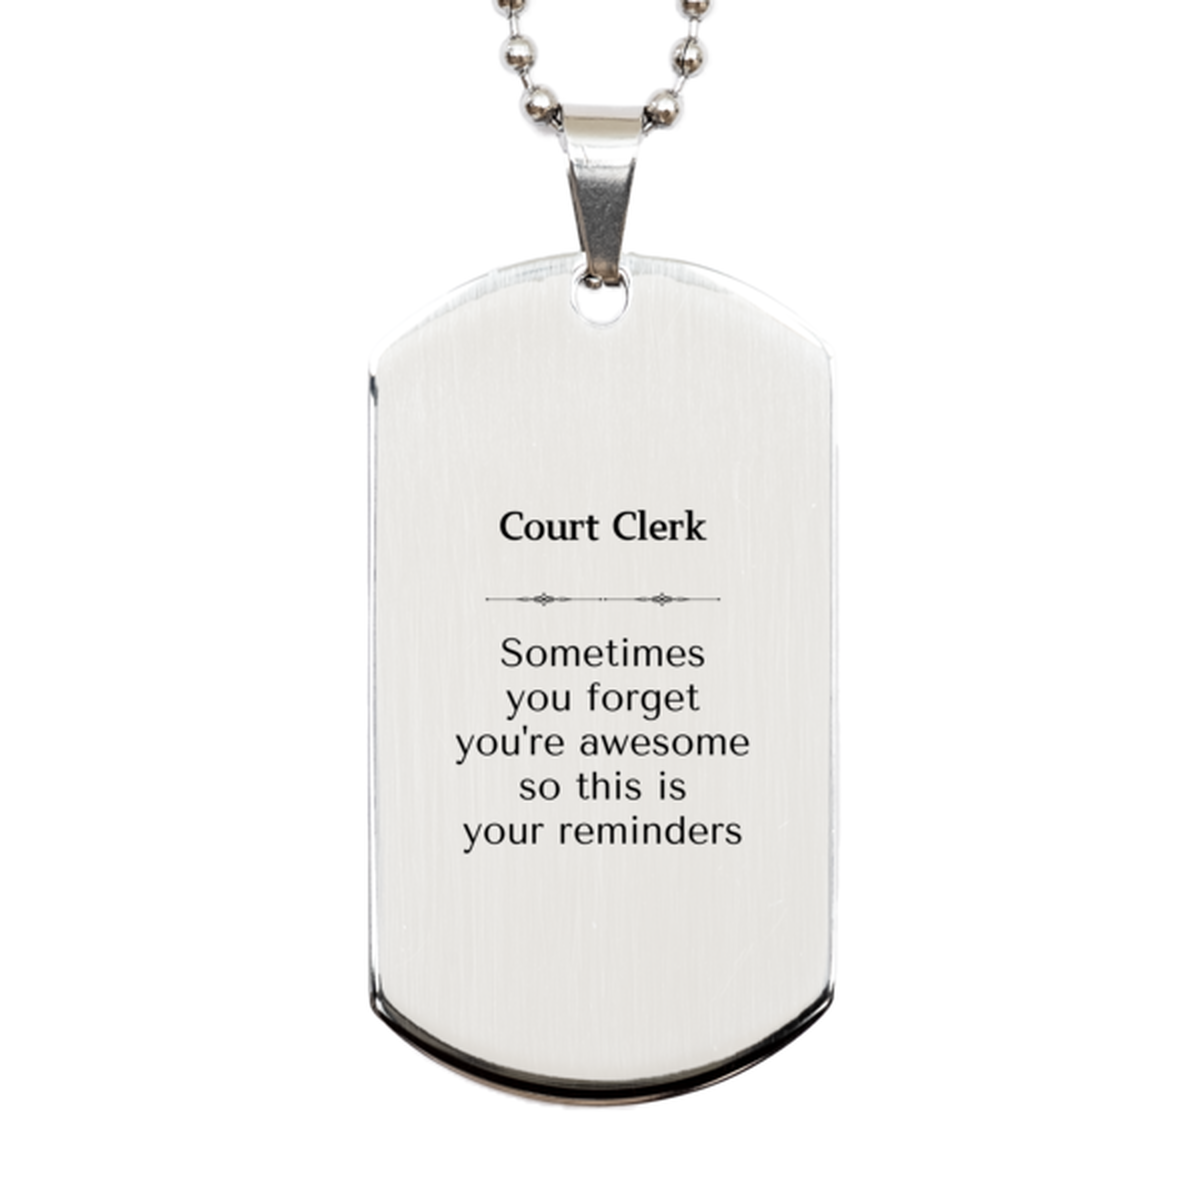 Sentimental Court Clerk Silver Dog Tag, Court Clerk Sometimes you forget you're awesome so this is your reminders, Graduation Christmas Birthday Gifts for Court Clerk, Men, Women, Coworkers